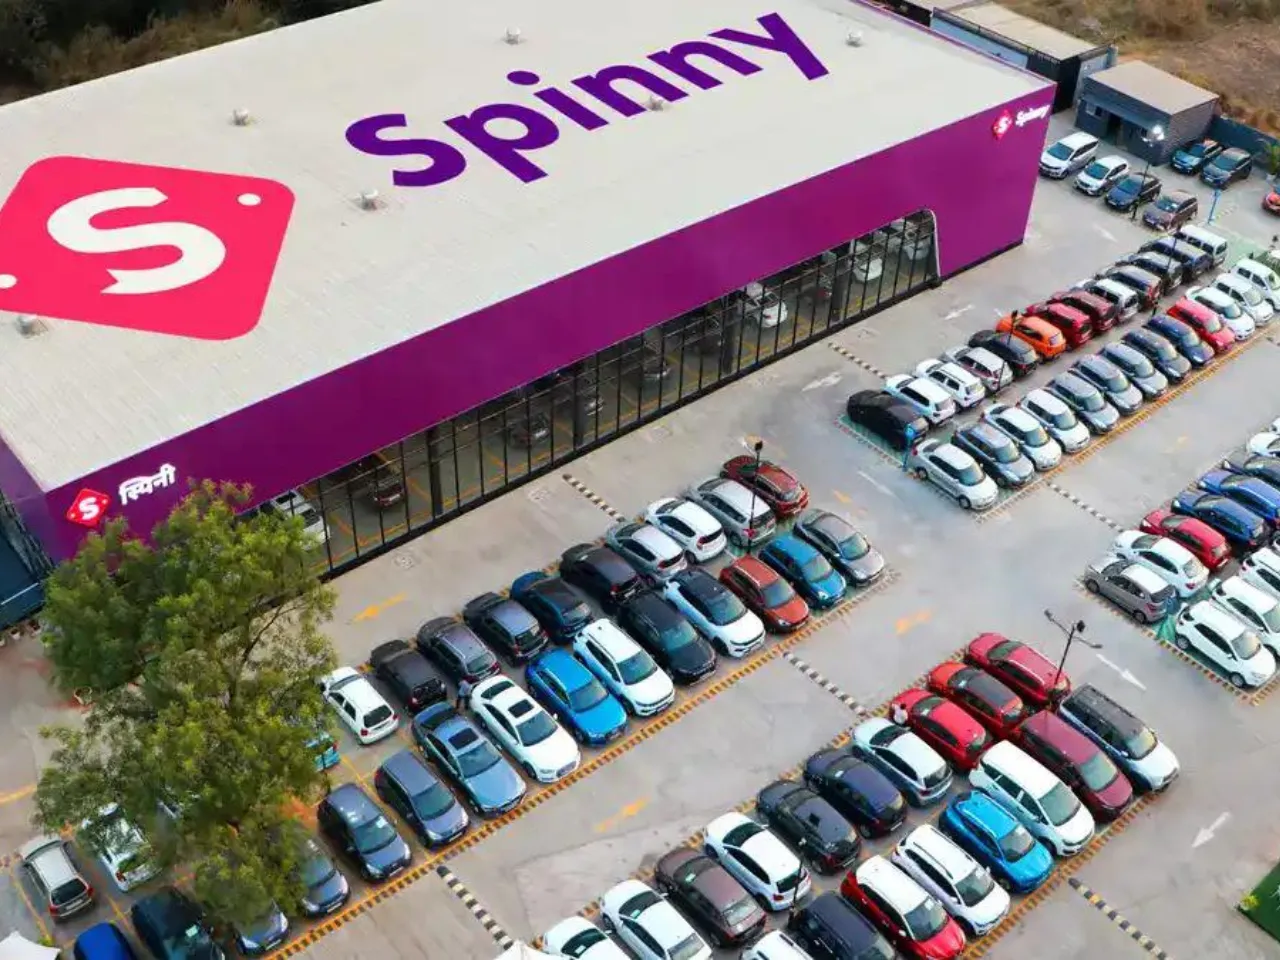 Used-cars marketplace Spinny laysoff 300 employees as part restructuring process